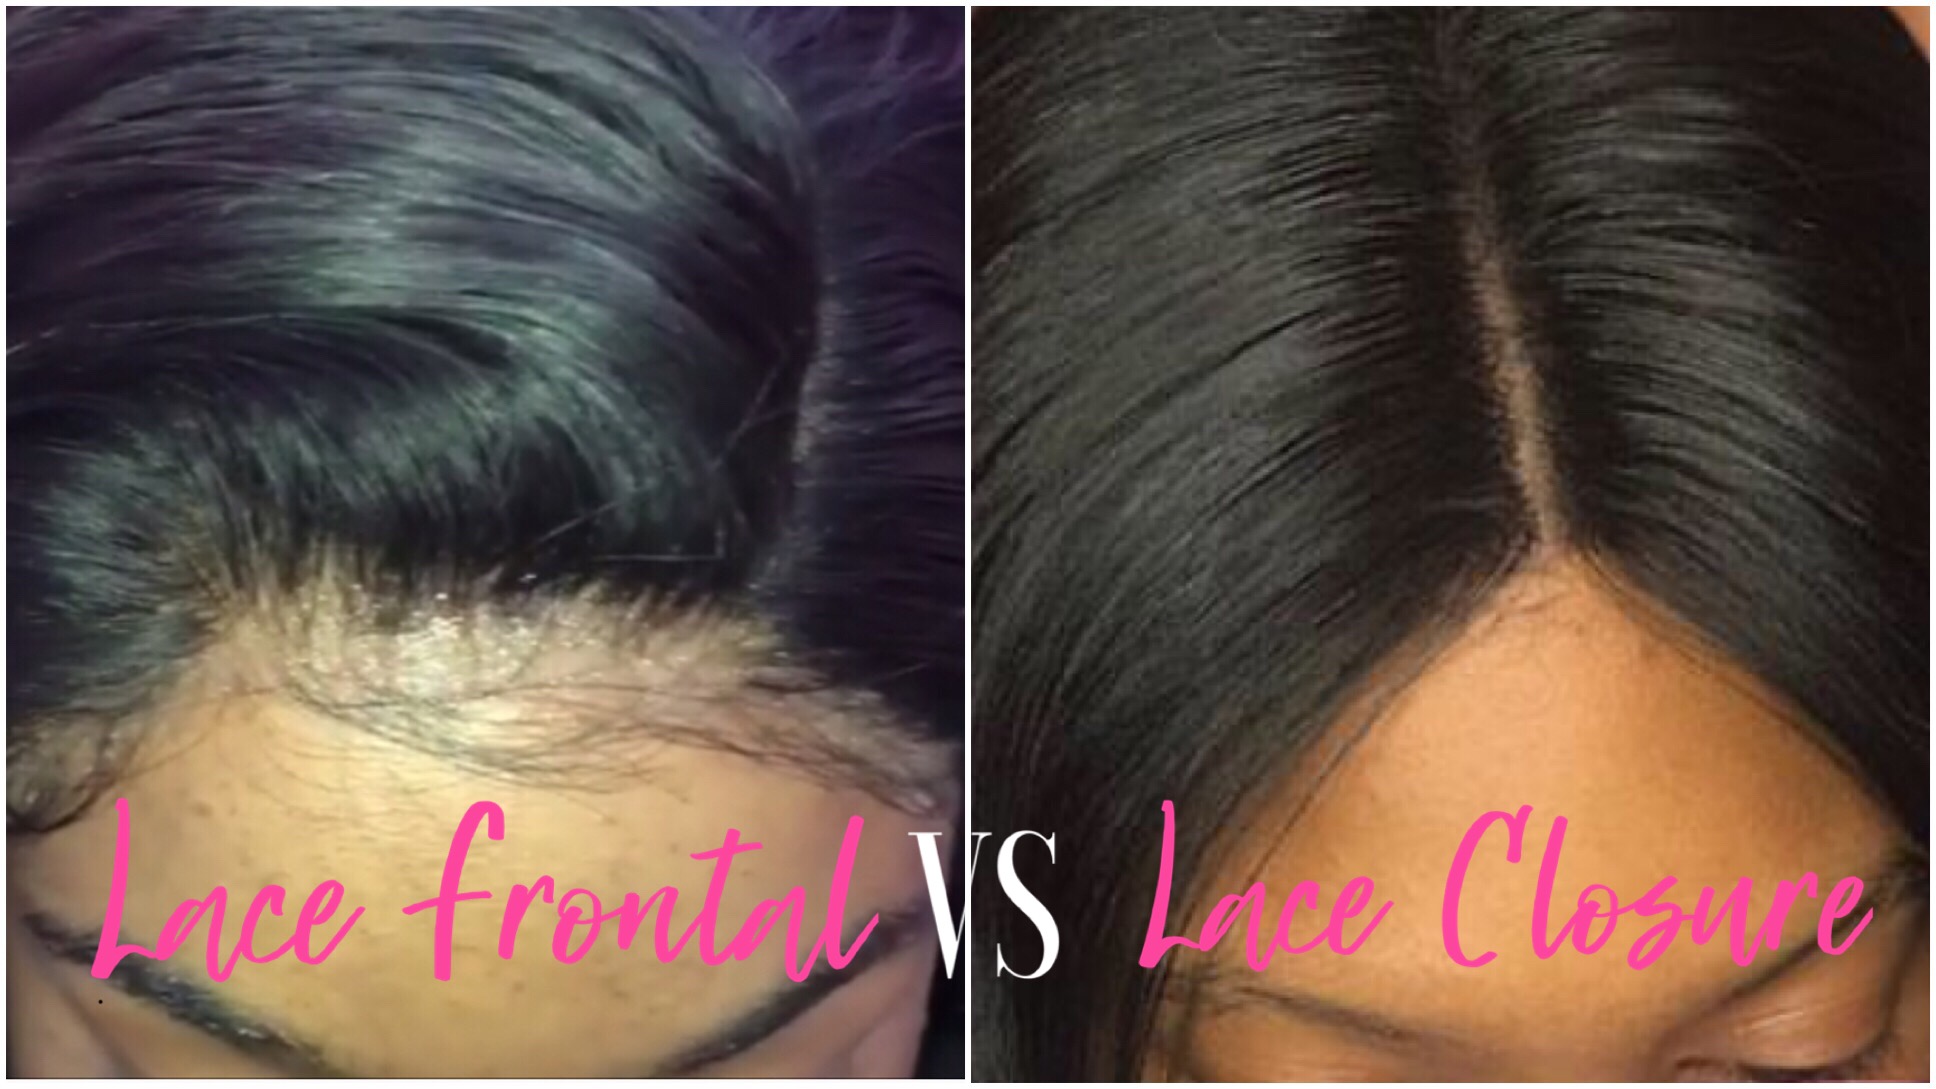 What's the difference between a lace closure and a lace frontal